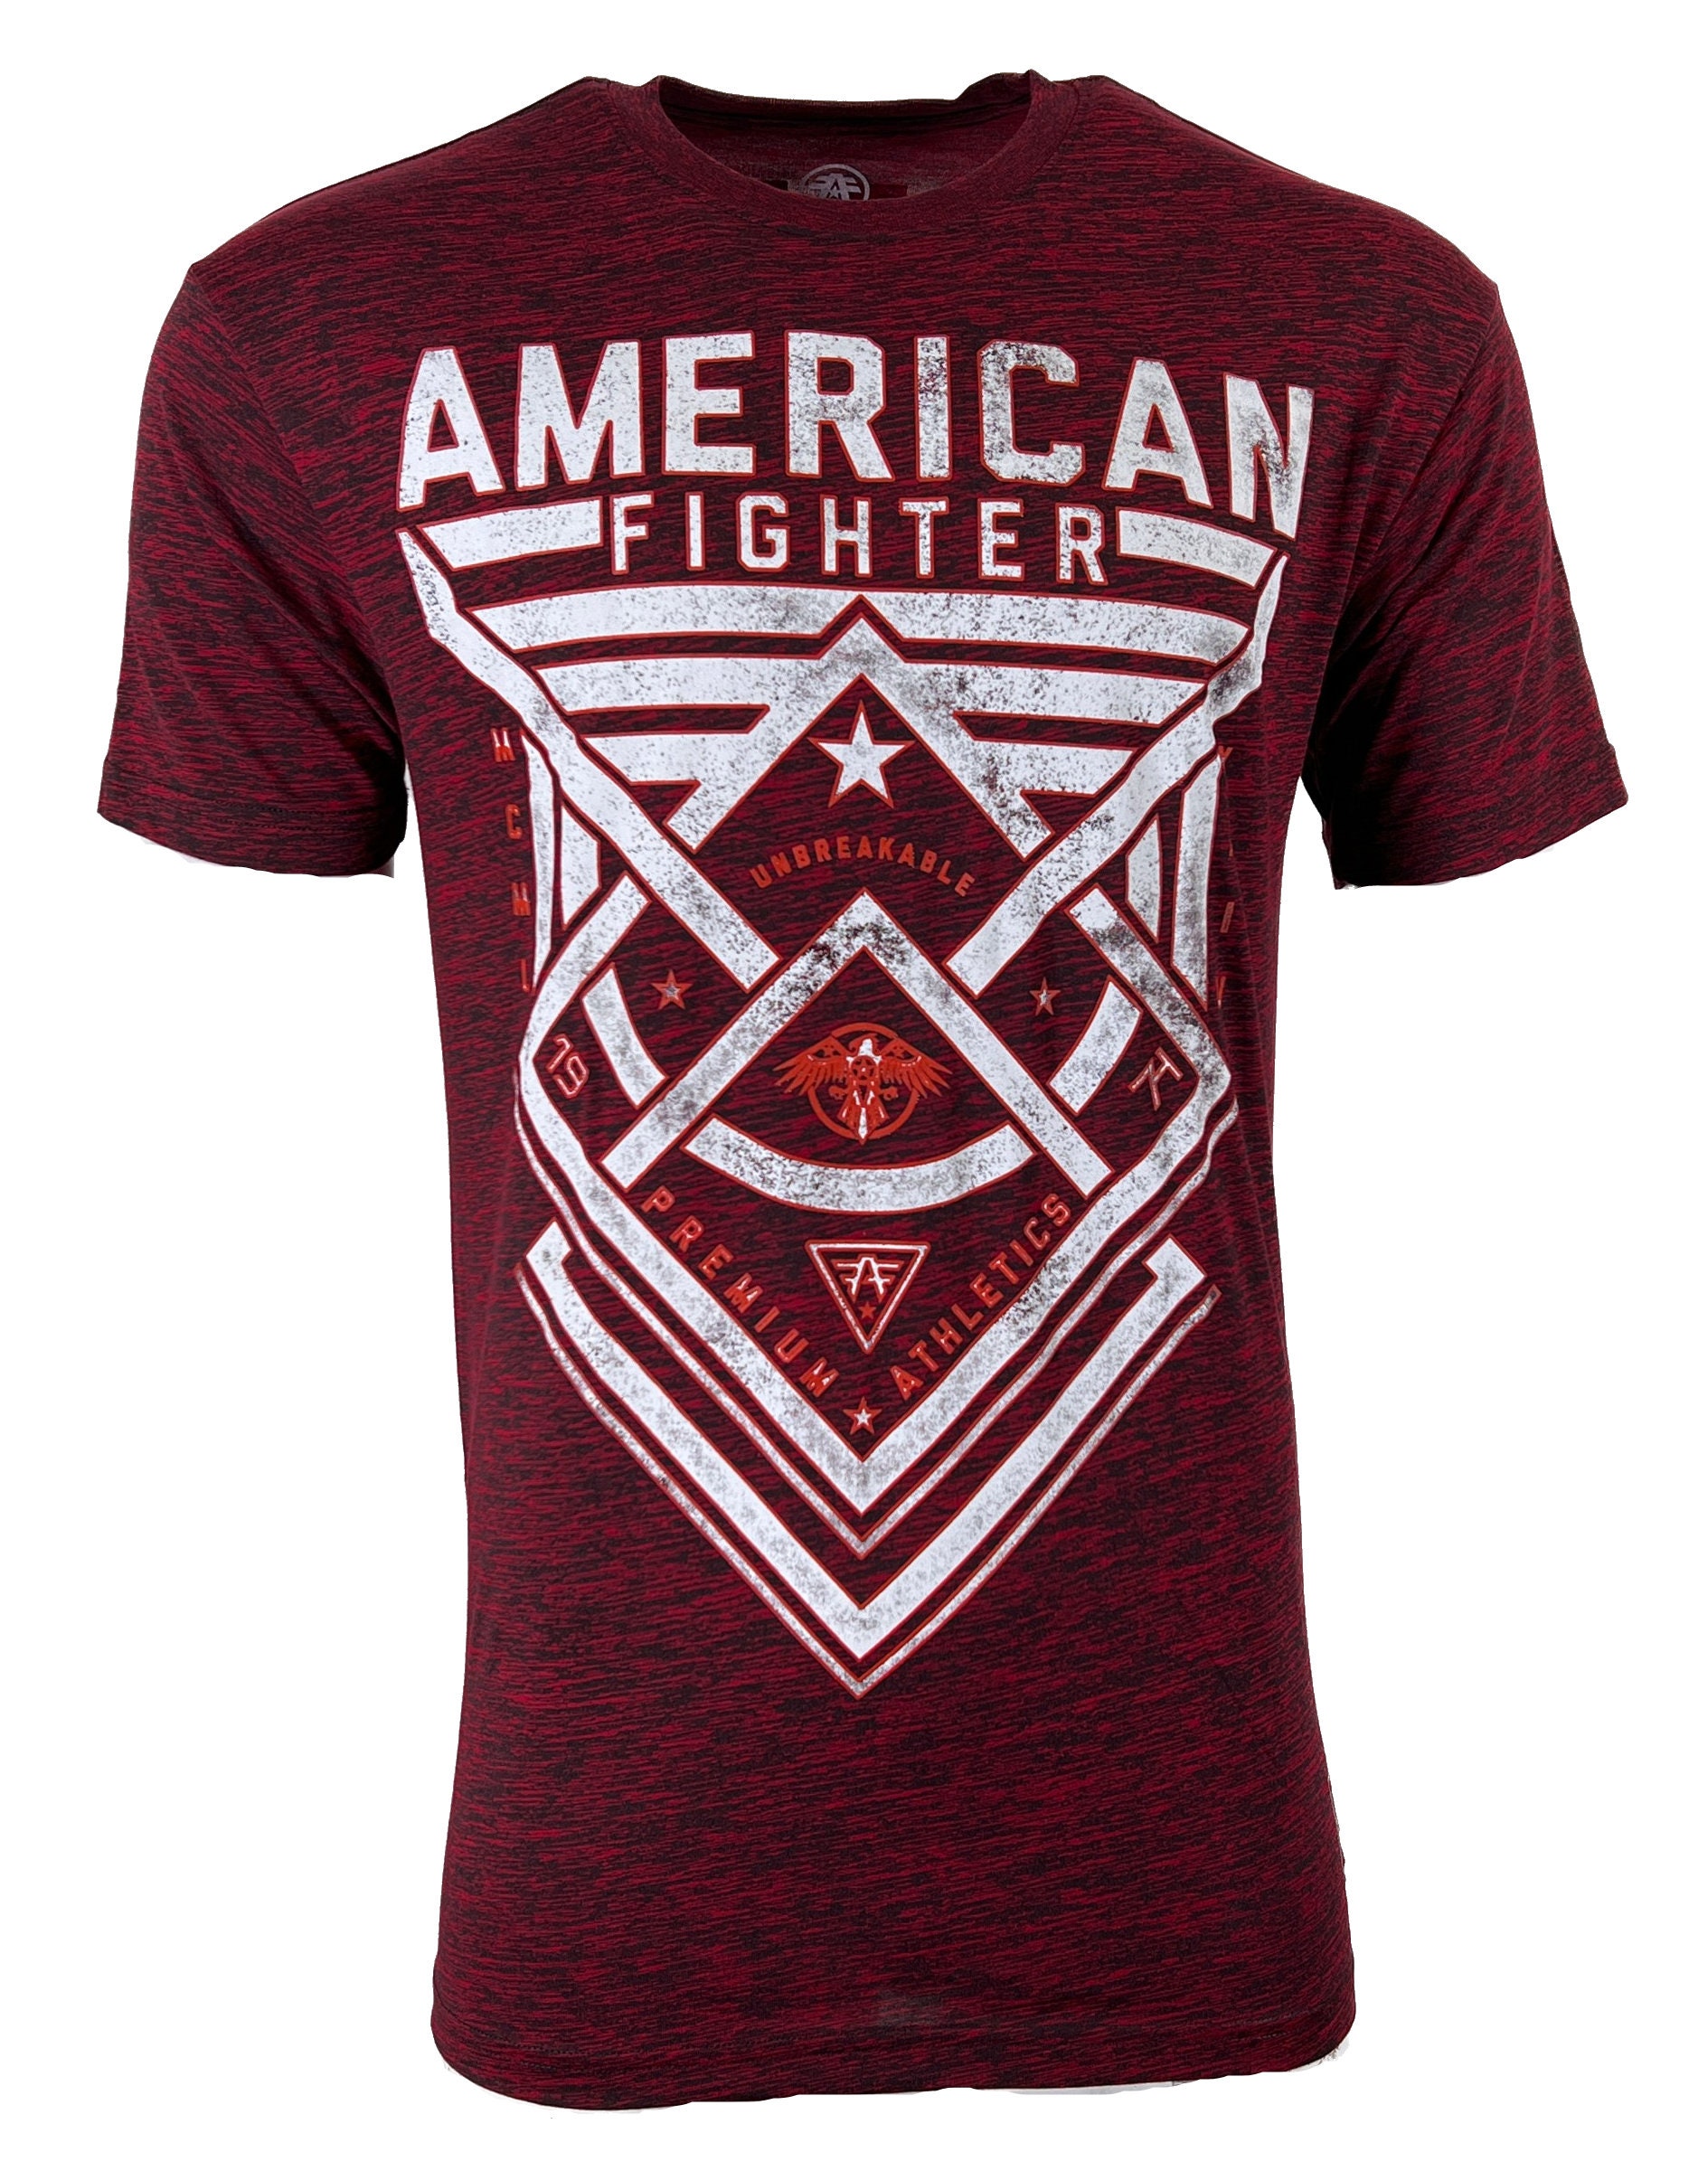 Discover AMERICAN FIGHTER Men's T-shirt DUSTIN Crew Neck Short Sleeve Red